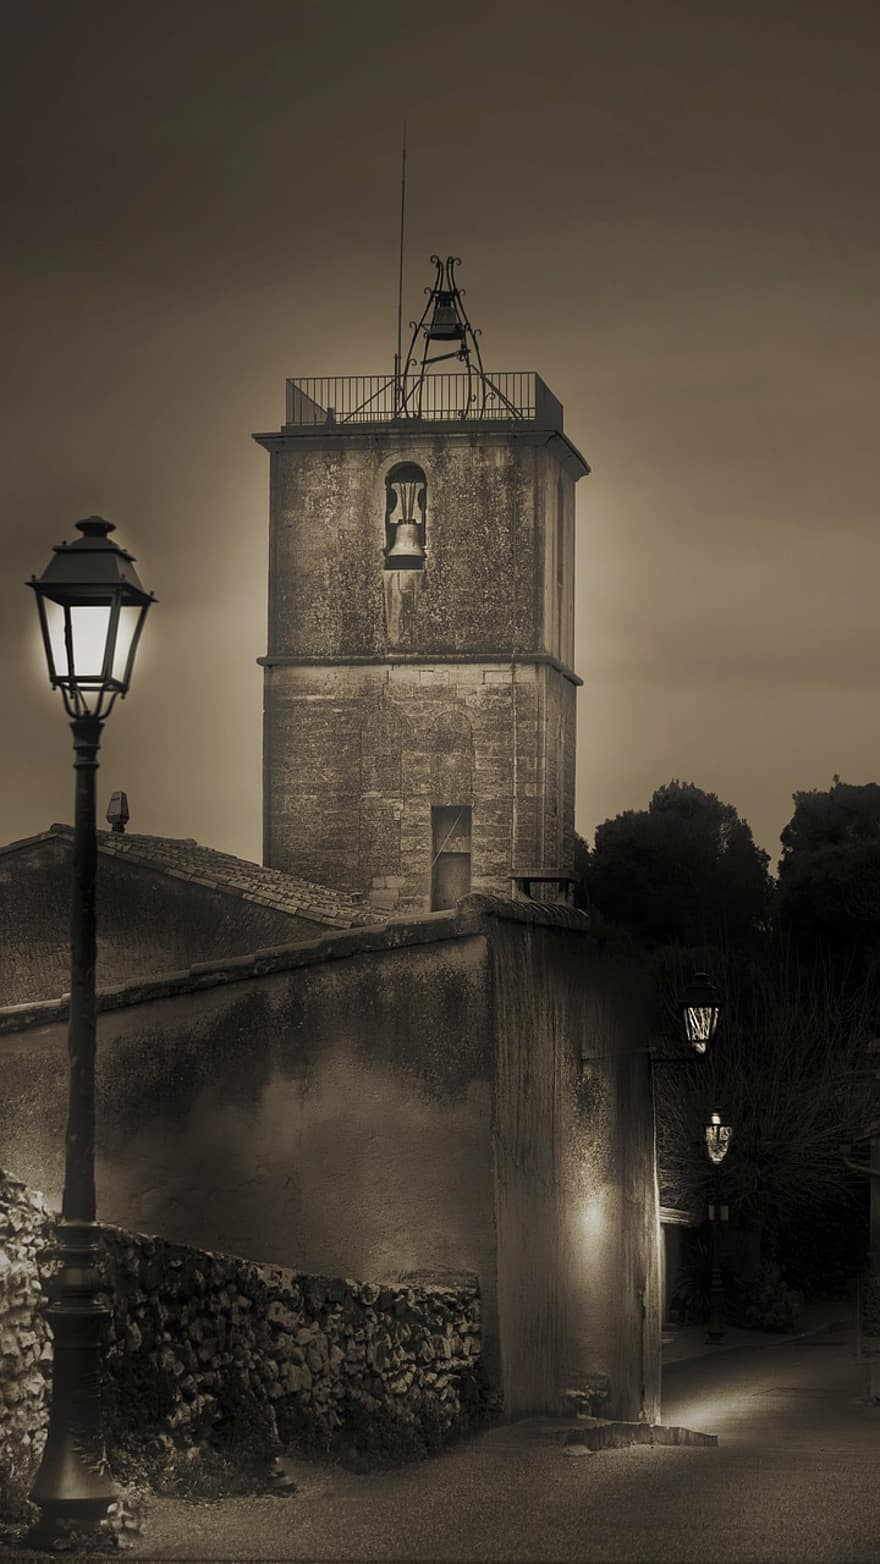 Tower, Building, Lamp Post, Street Light, Bell Tower, Old Building, Architecture, Facade, Monochrome, City Night, Black